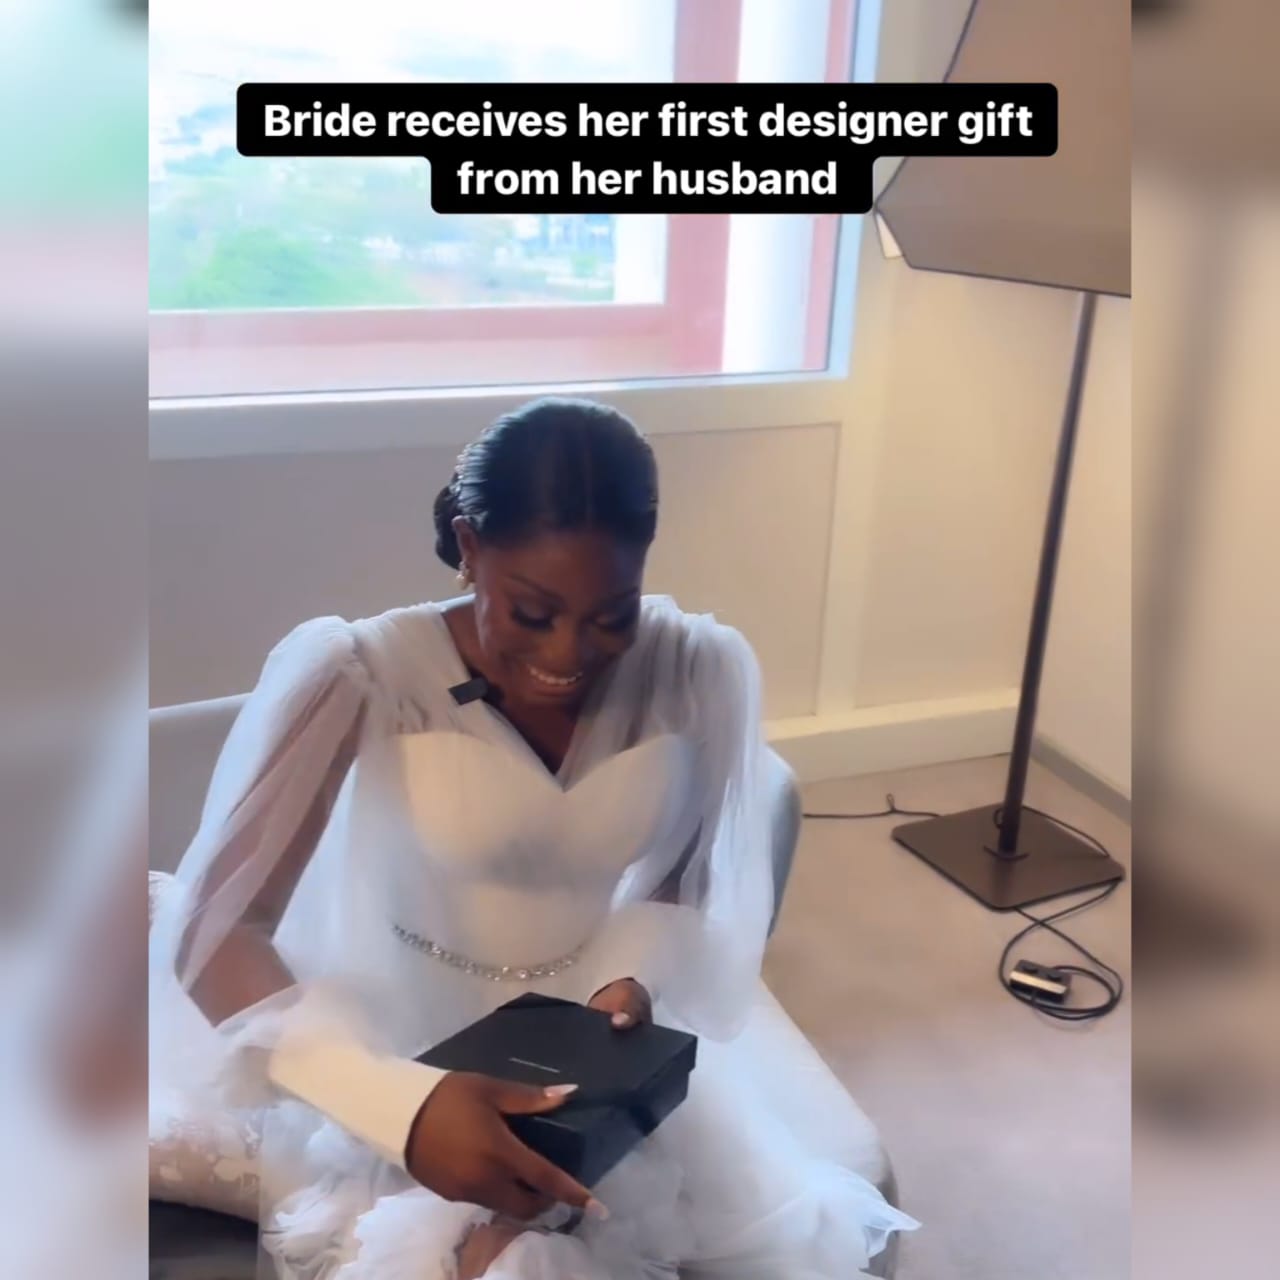 This Bride’s Response To The Reward From Her Sweetheart Will Make You Smile!